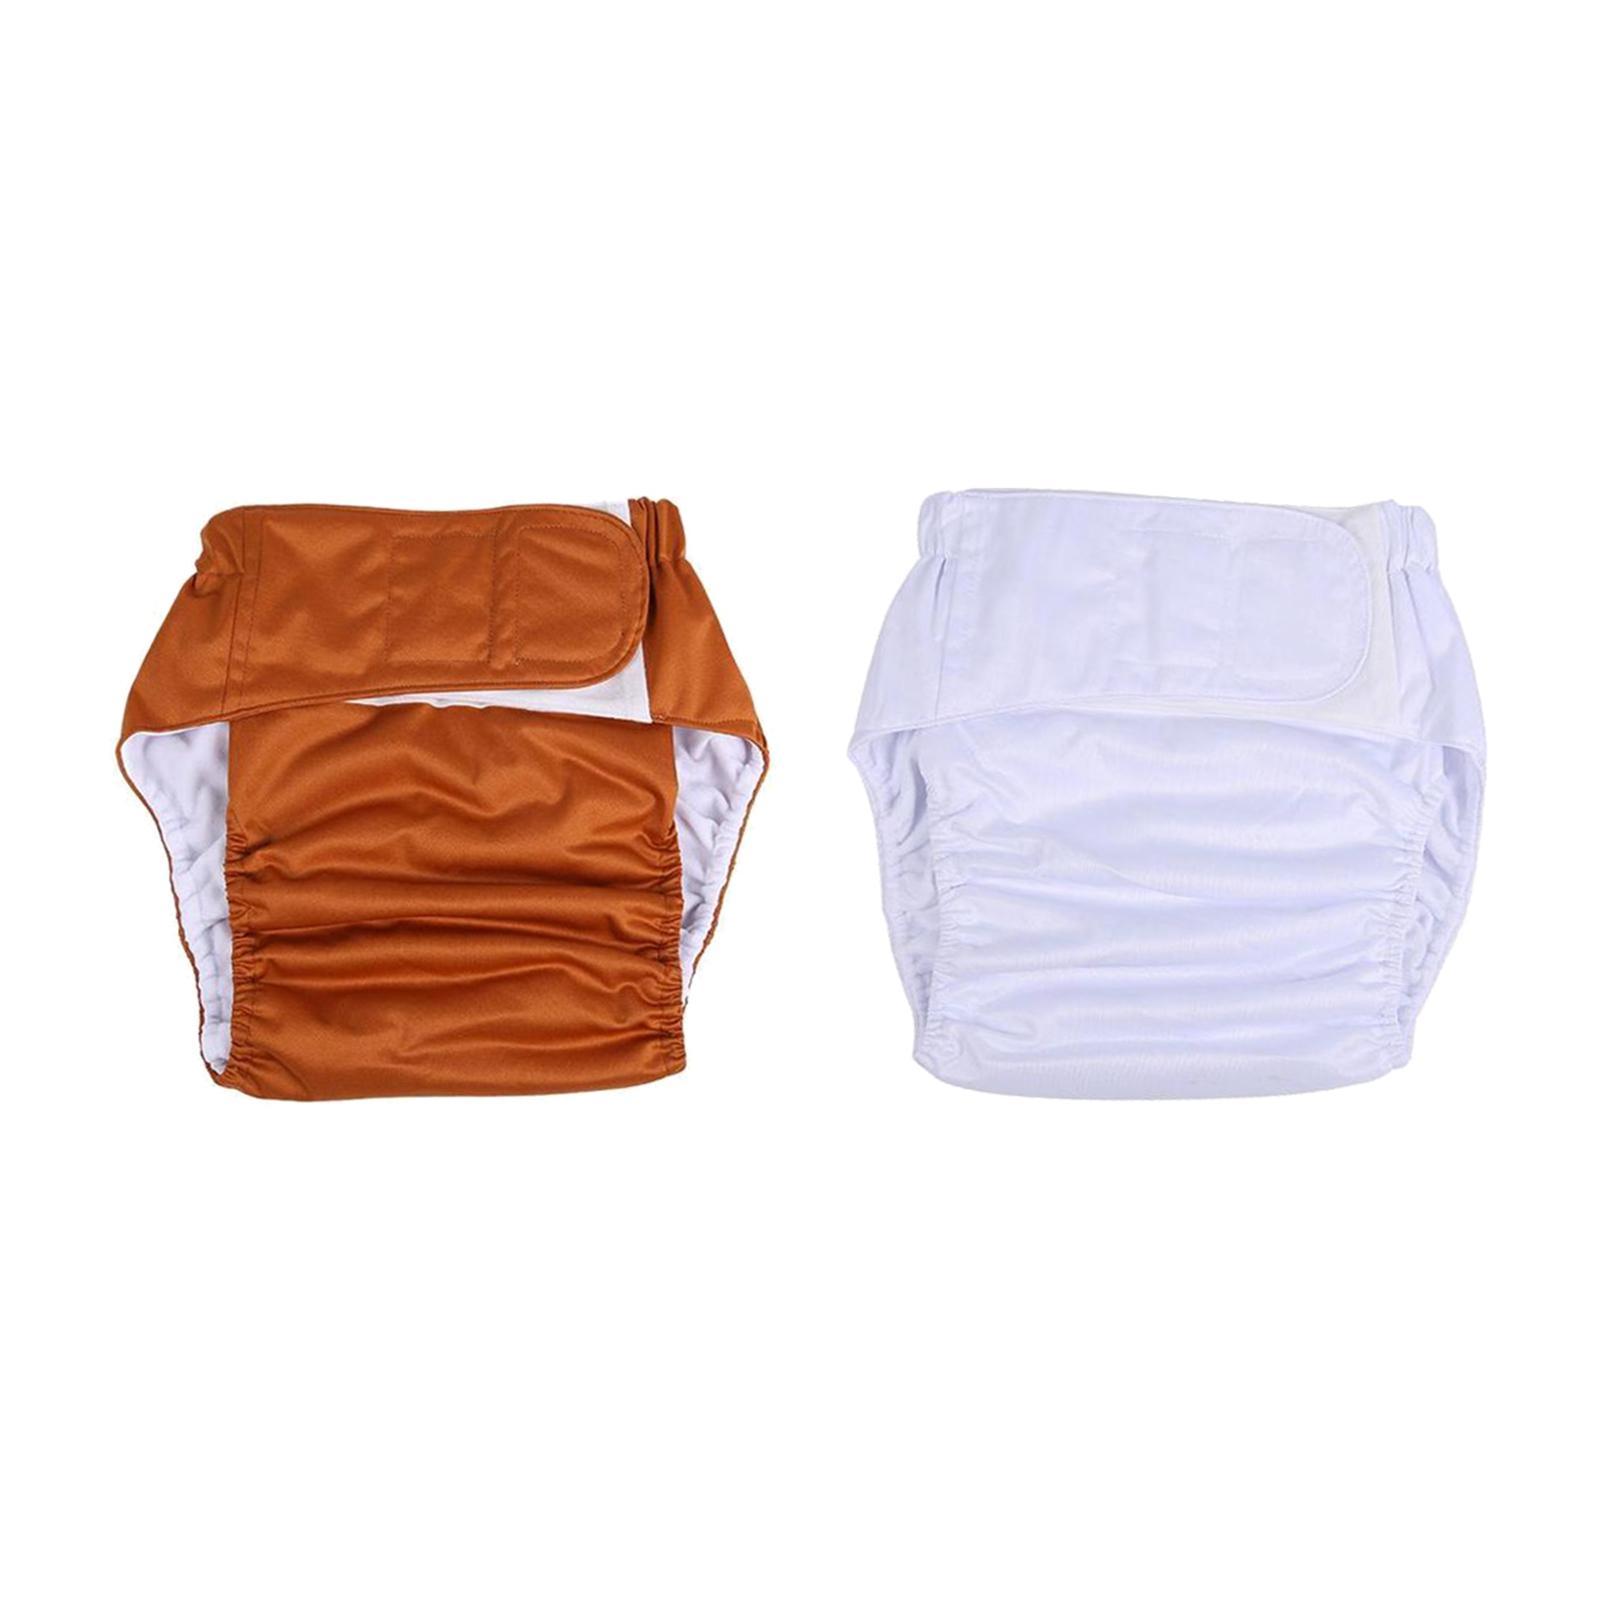 2x Reusable Adult Cloth Diaper Washable Nappy for Men Women Breathable